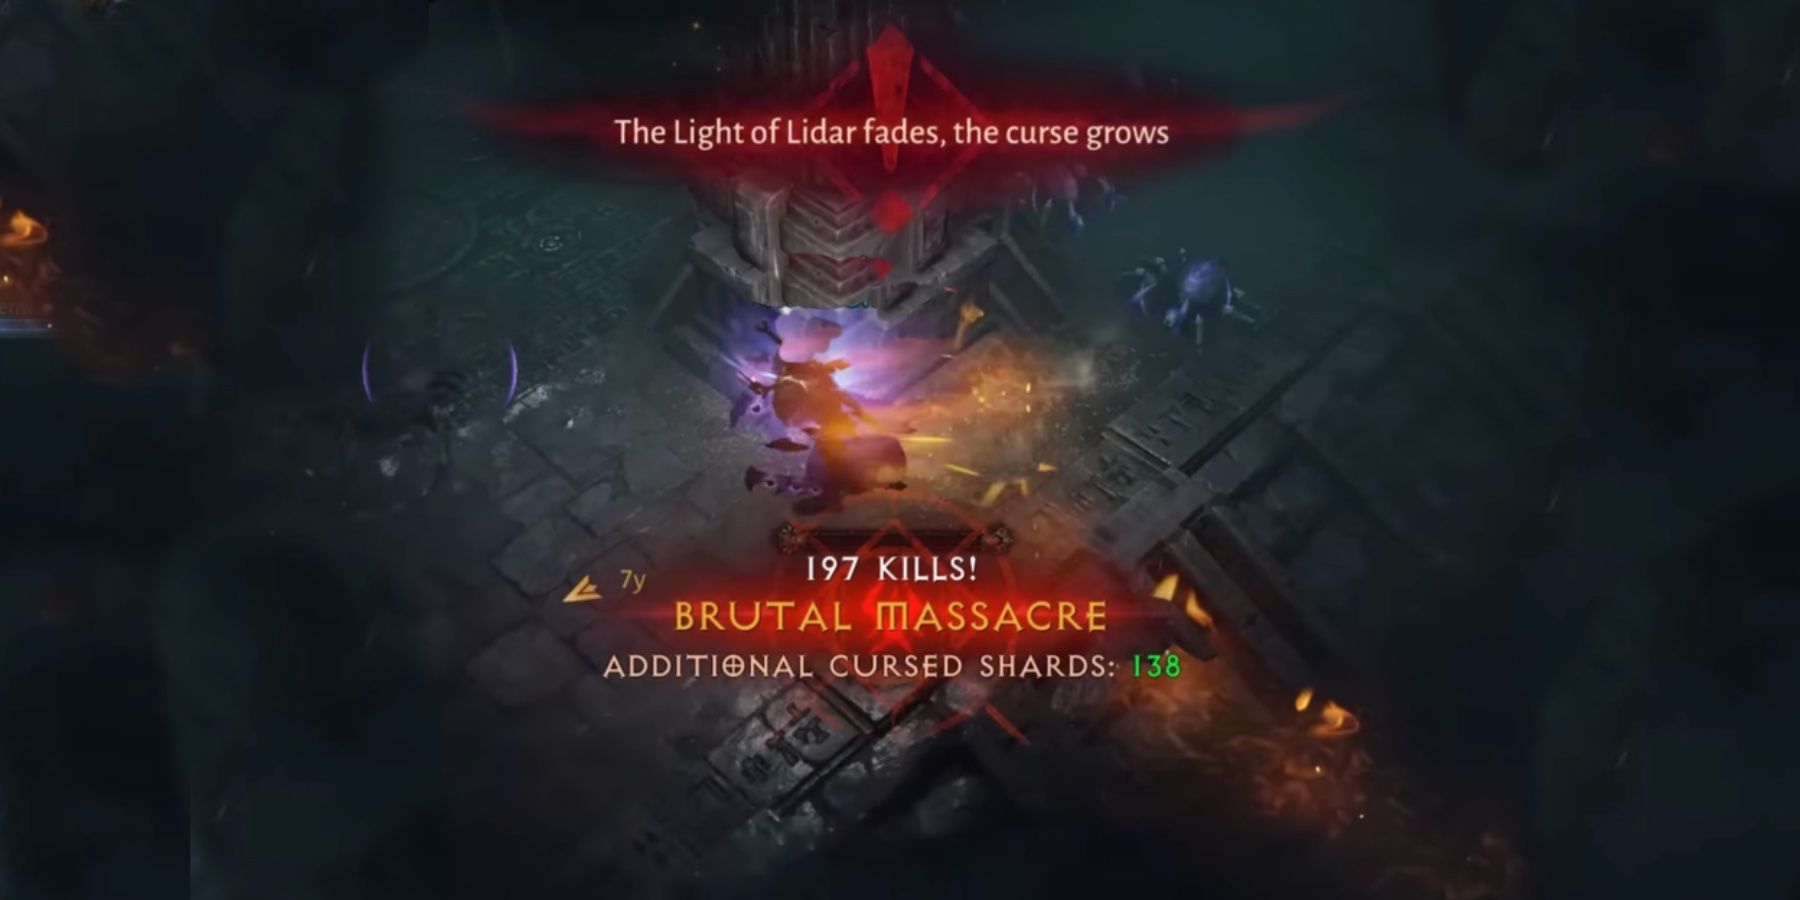 Warning about the Cursed Shards